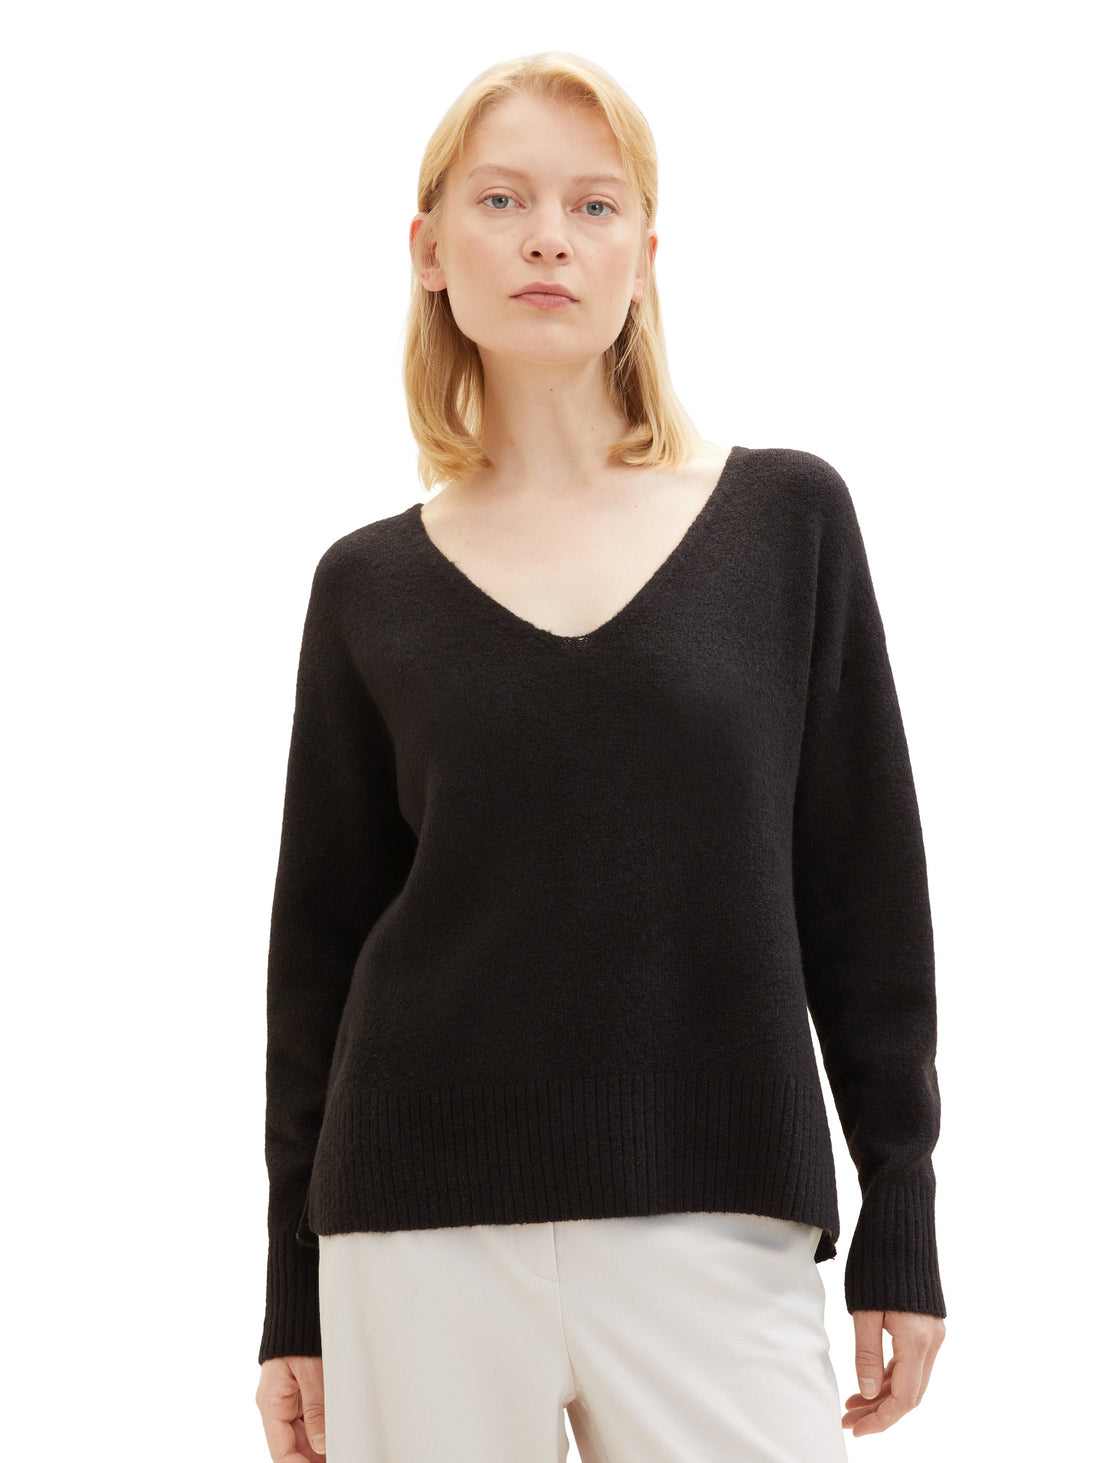 Loose Fit Sweater With Deep V Neck_1038392_14482_06